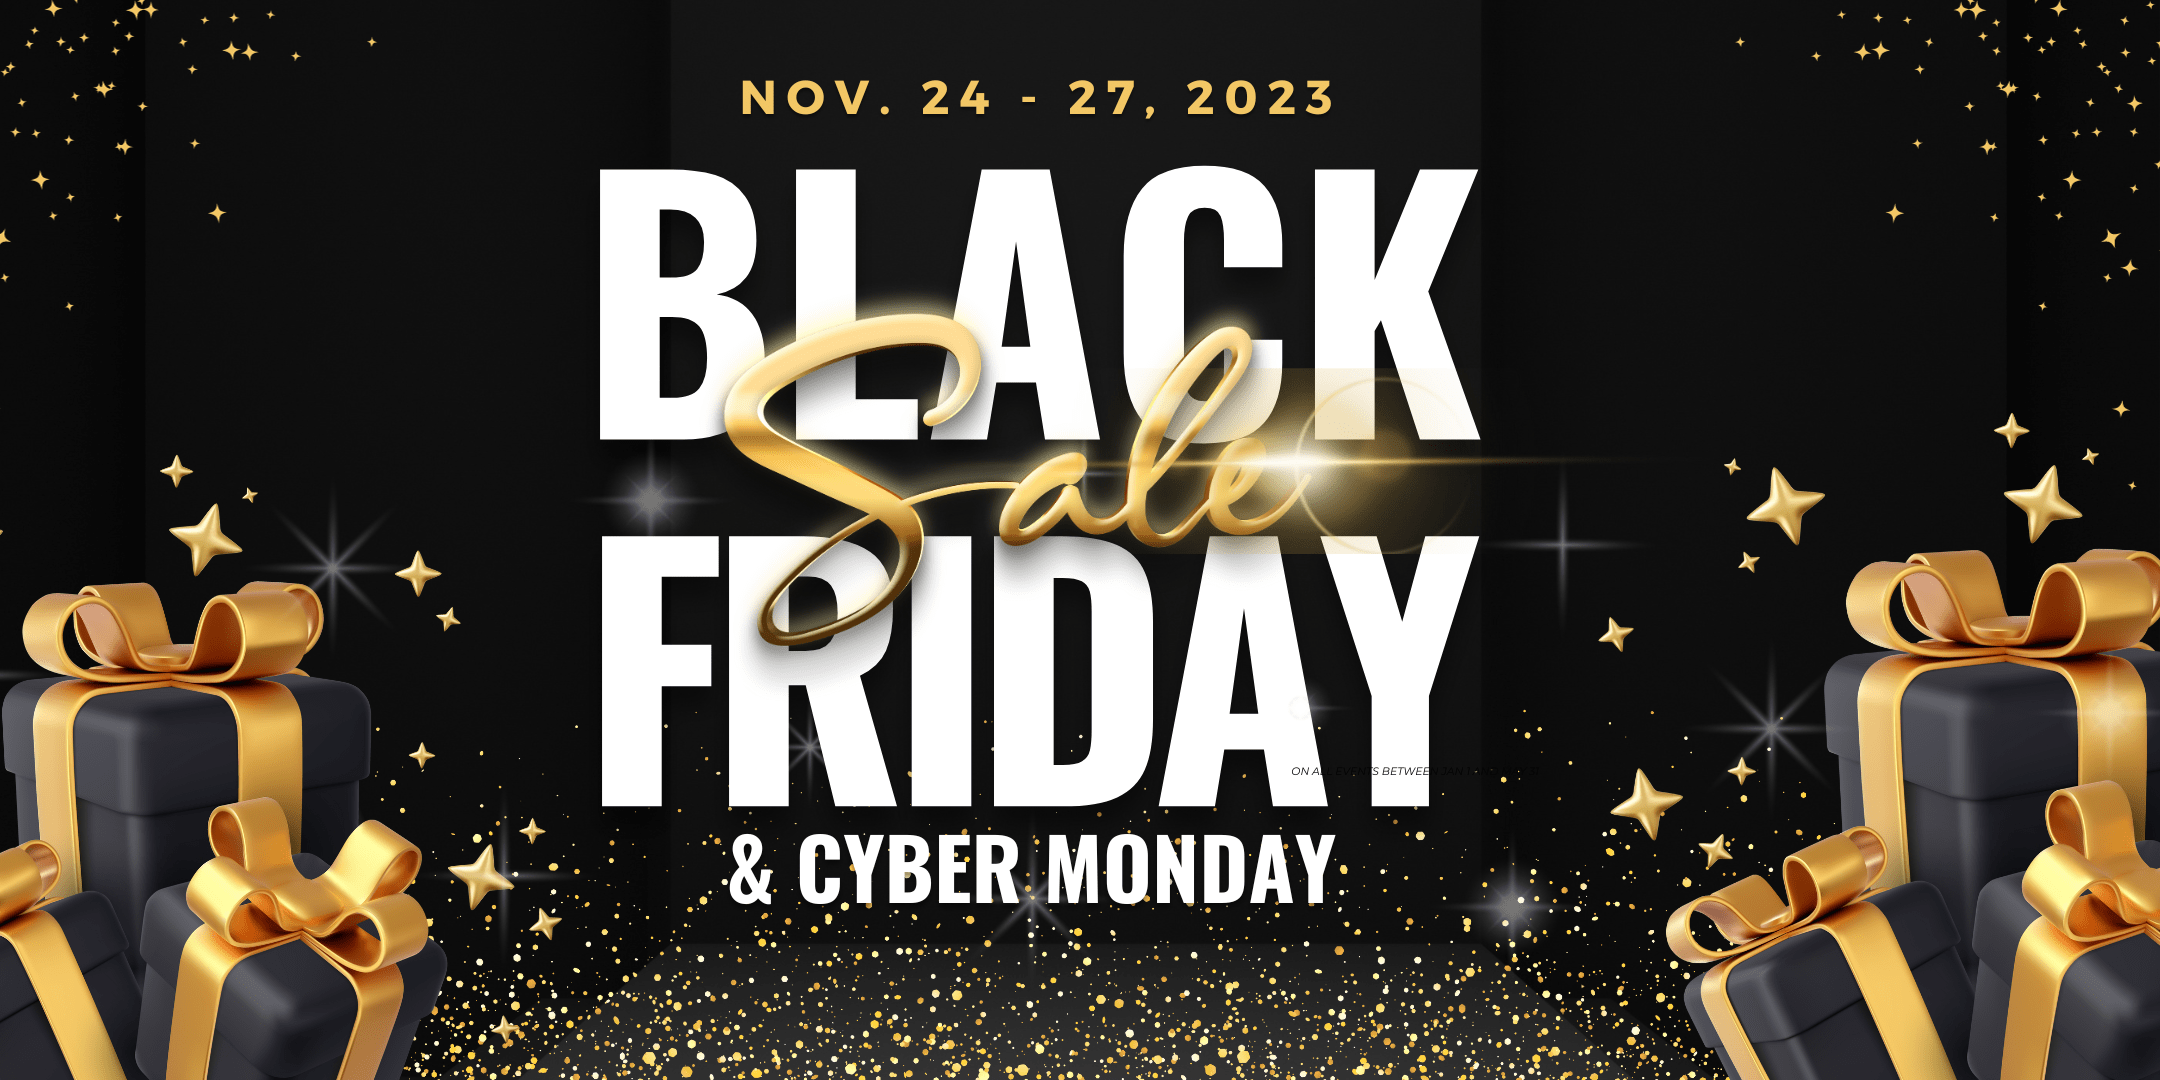 knix is having a big Black Friday / Cyber Monday sale and it's alrea